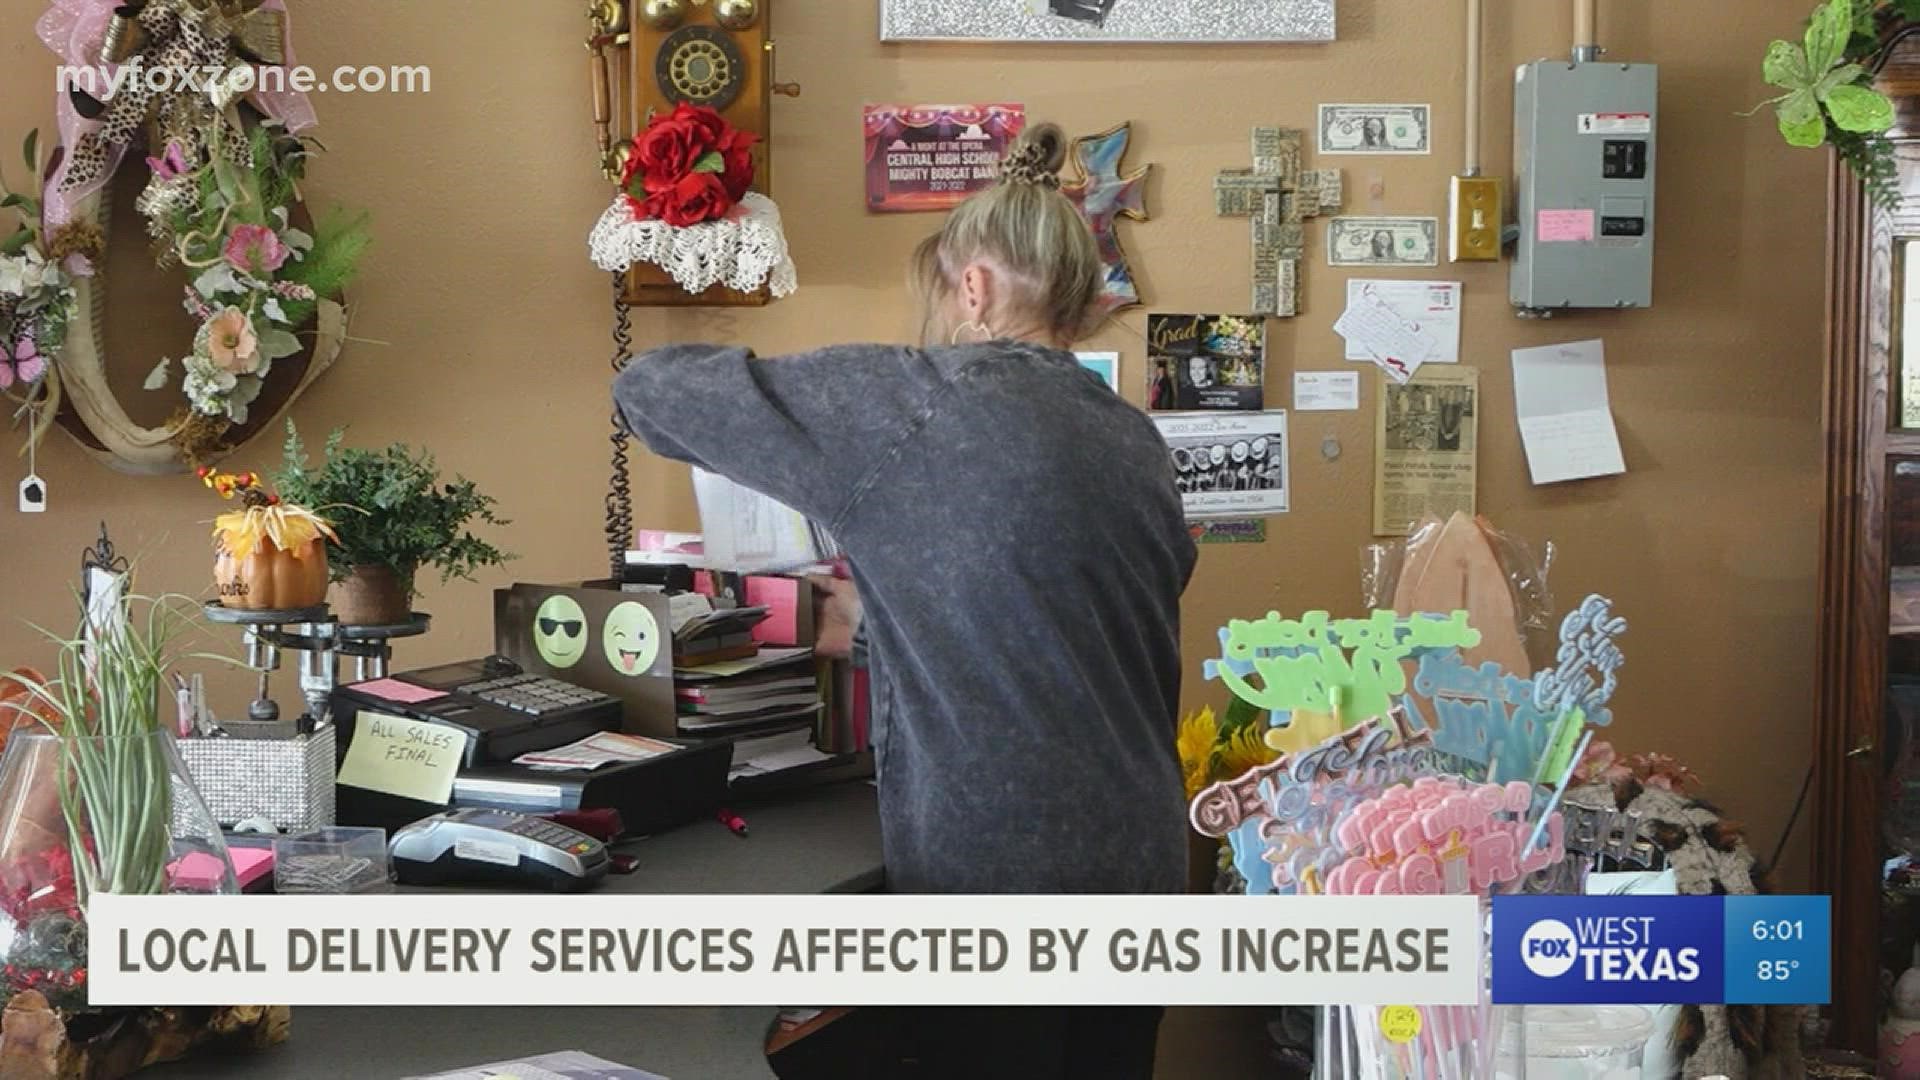 The rise in gas prices is affecting local delivery services, some are looking into more gas-friendly options.